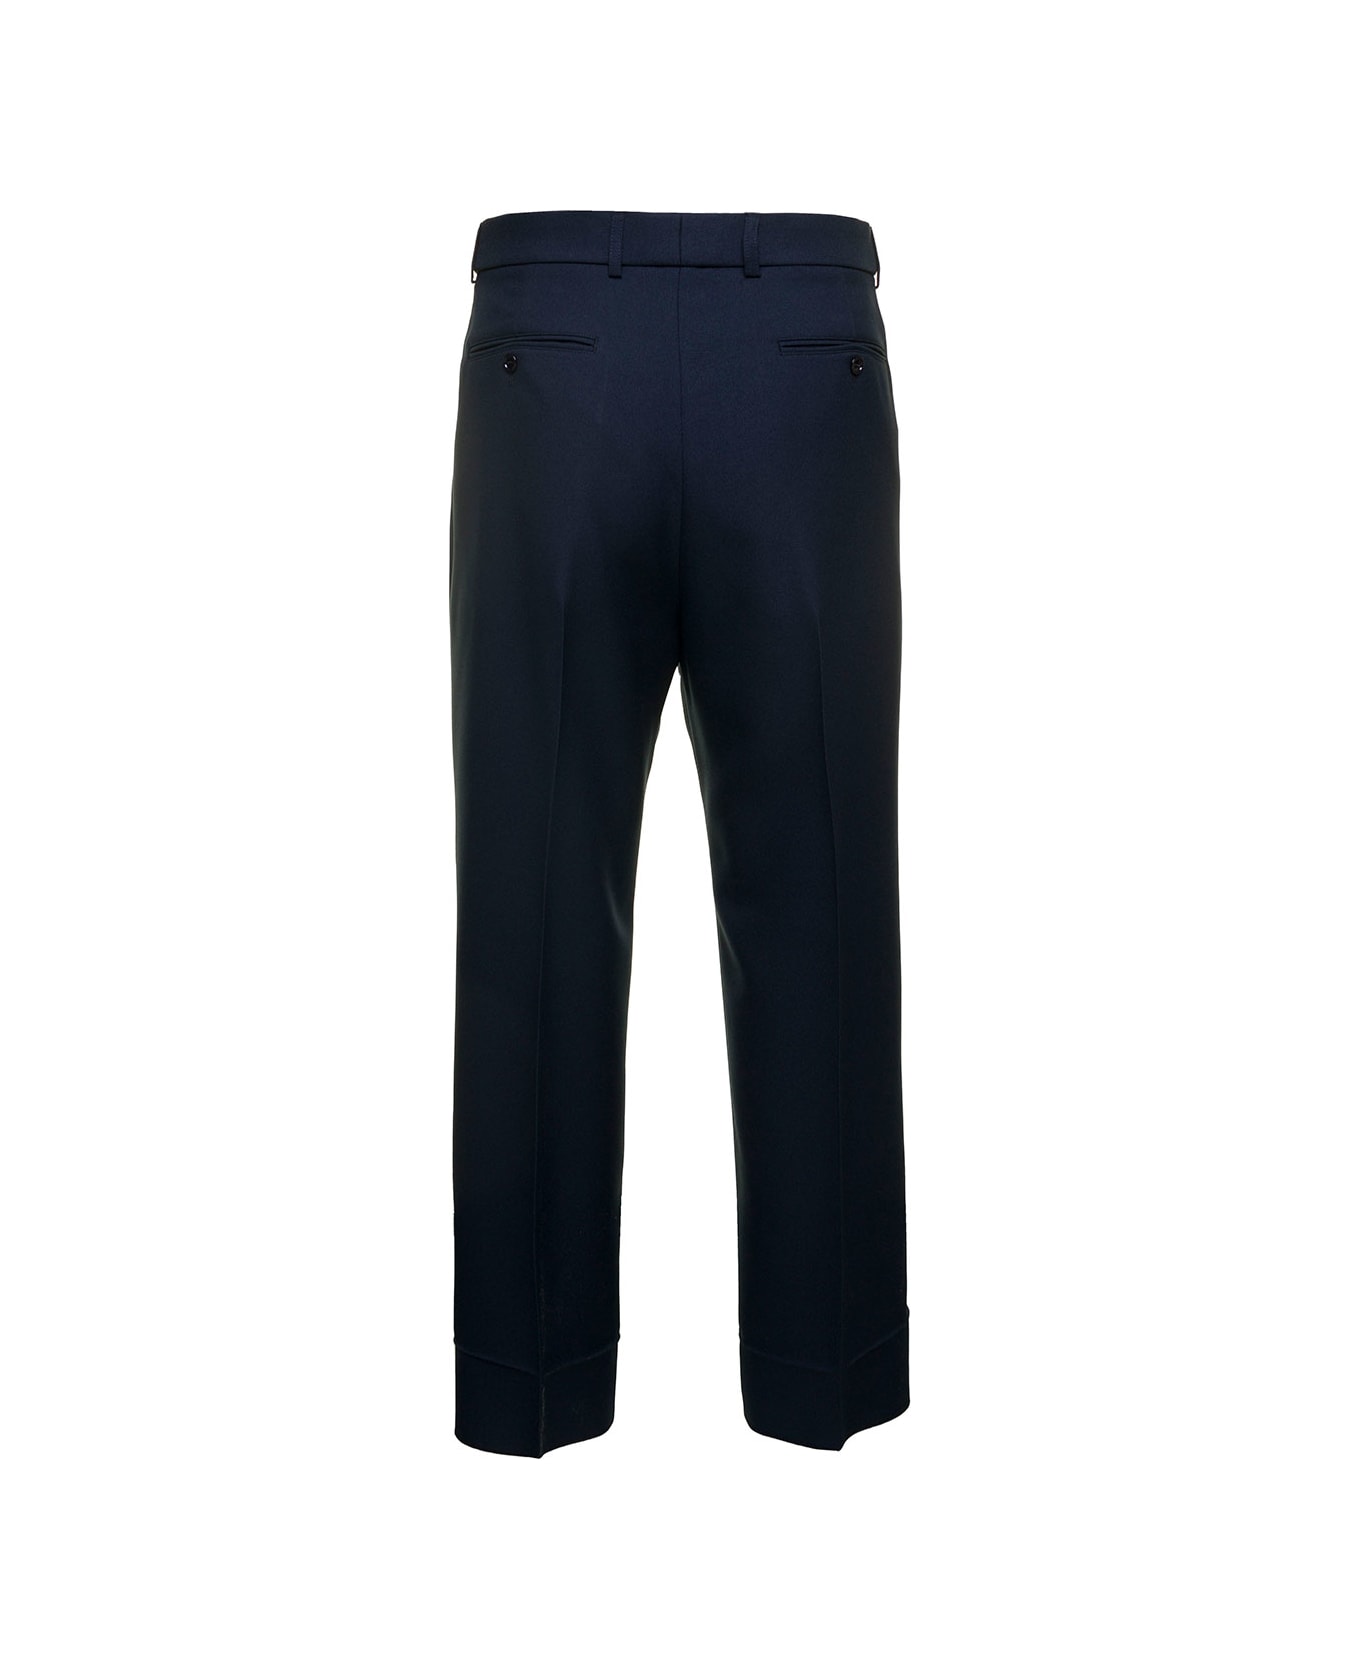 Gucci Pleat-front Trousers - Blue ボトムス